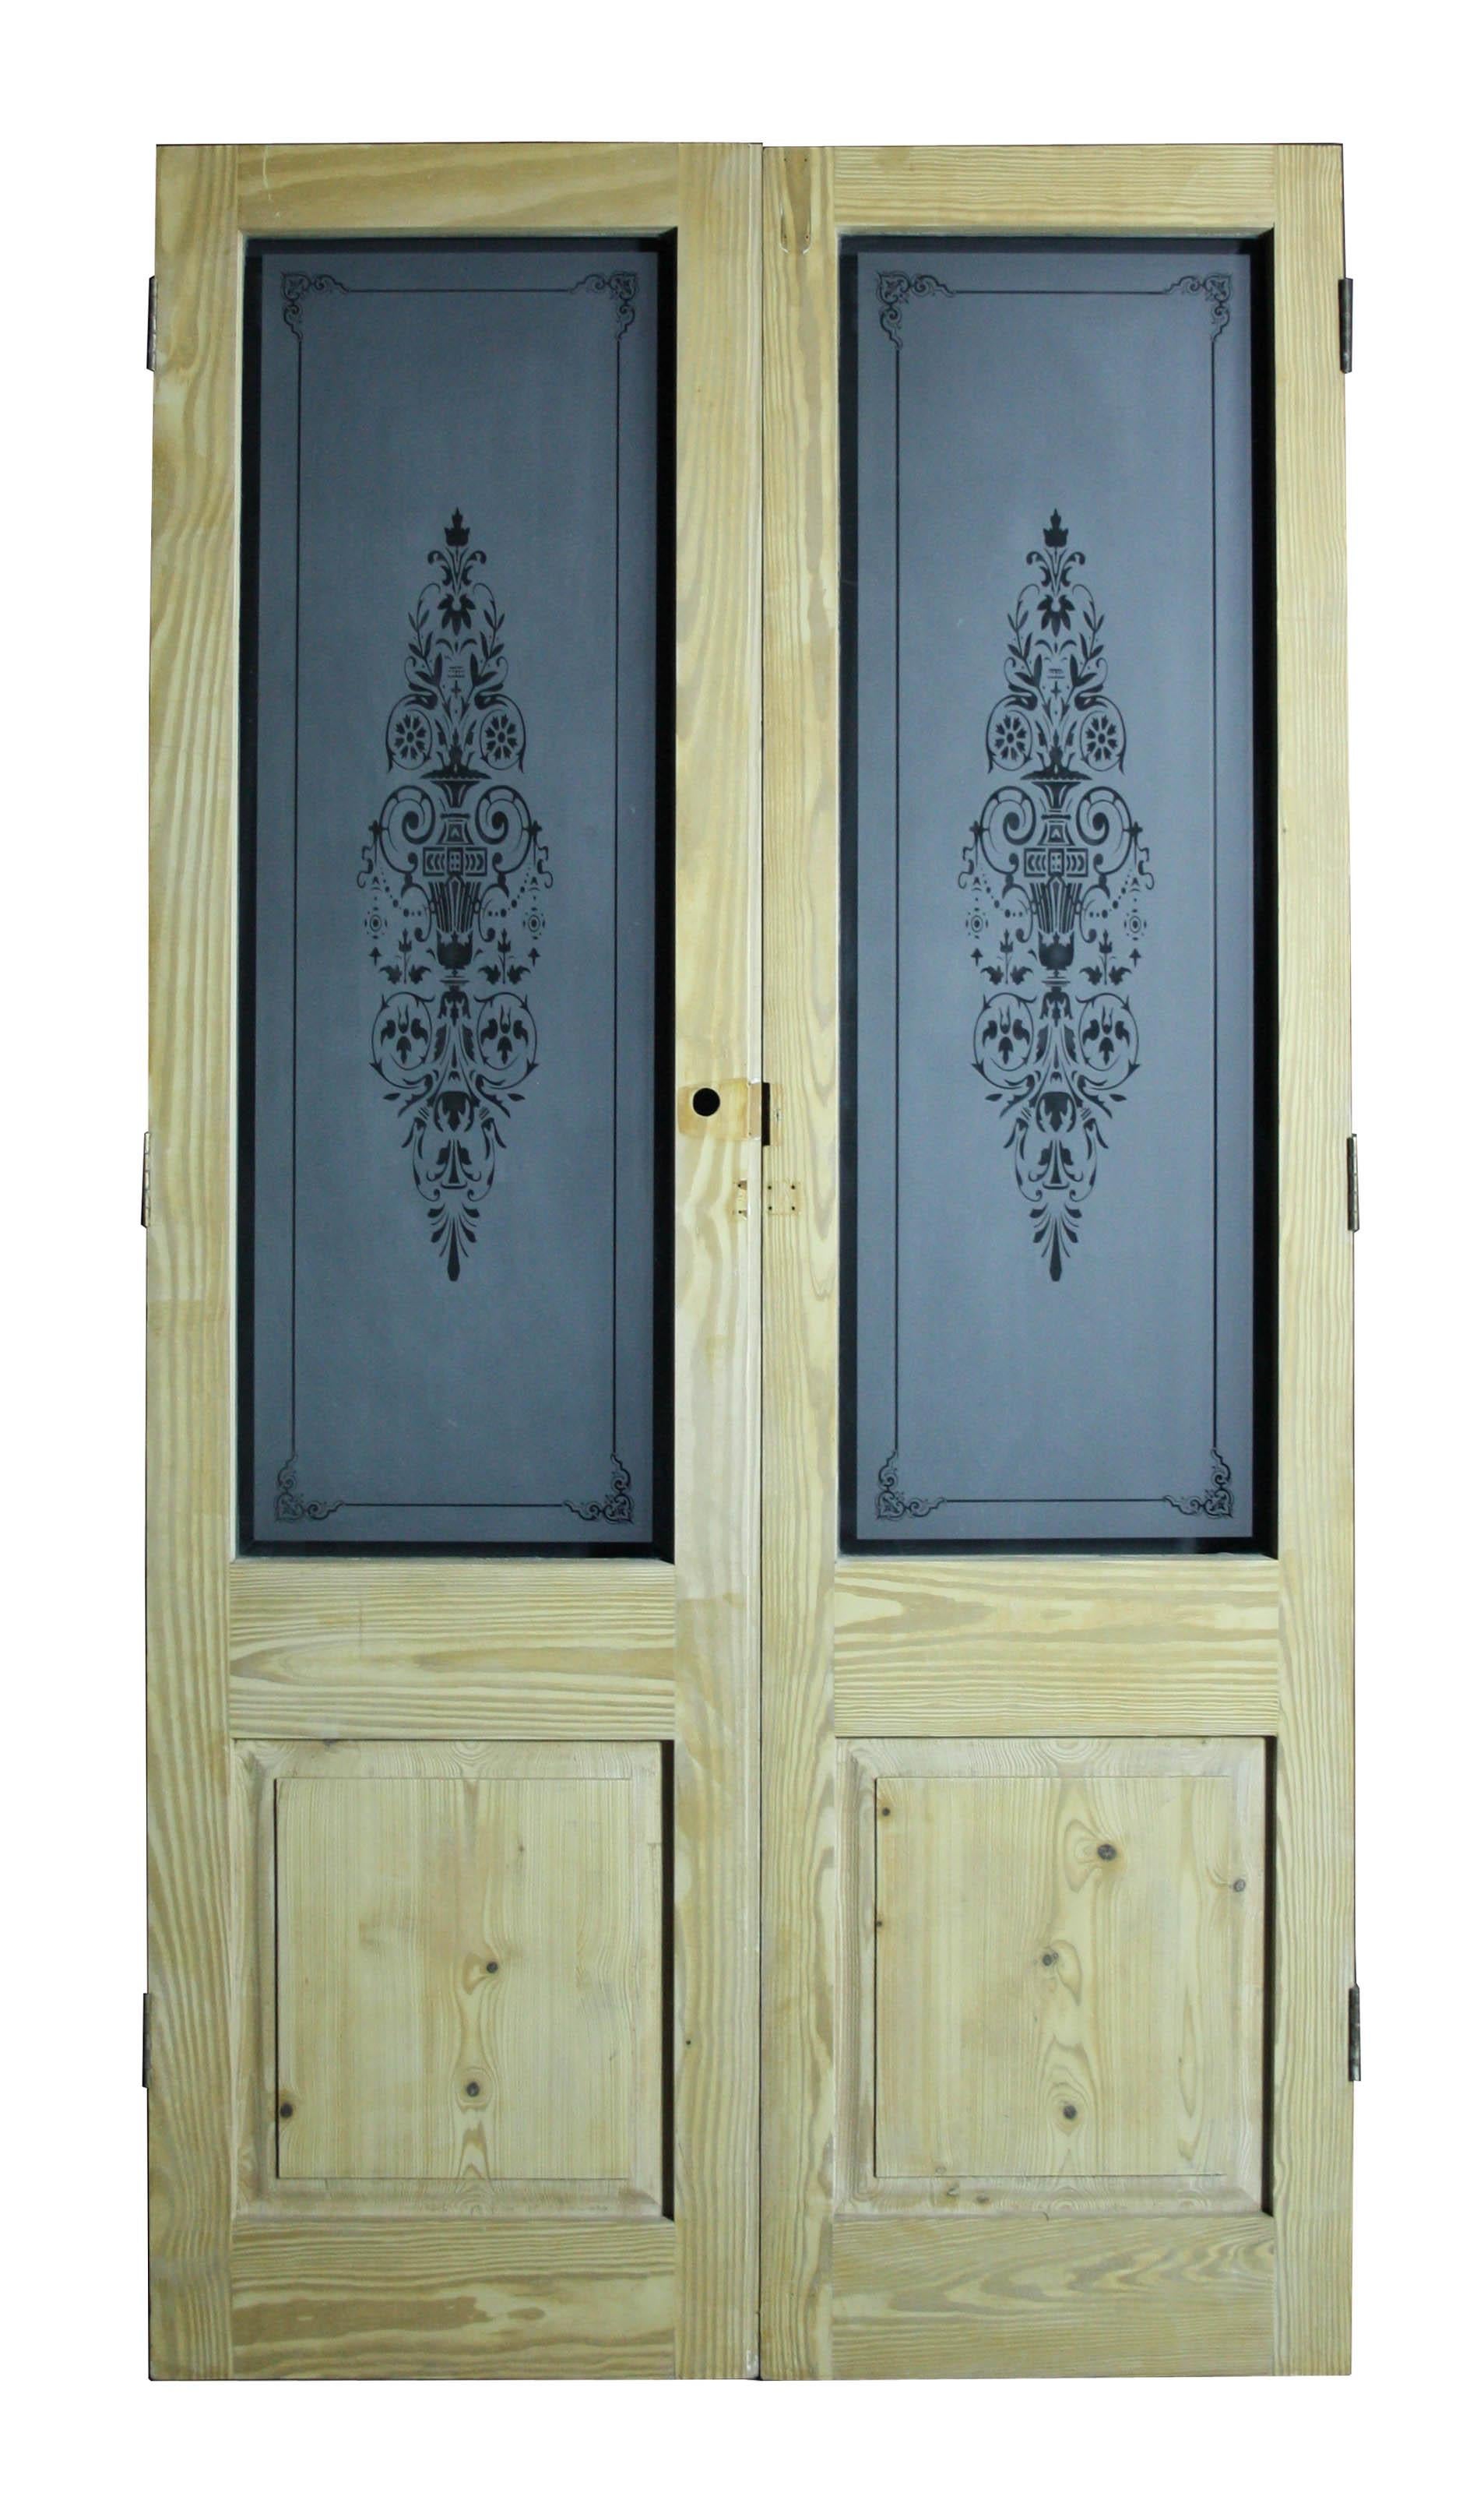 A set of reclaimed exterior or interior doors, fitted with etched glass.